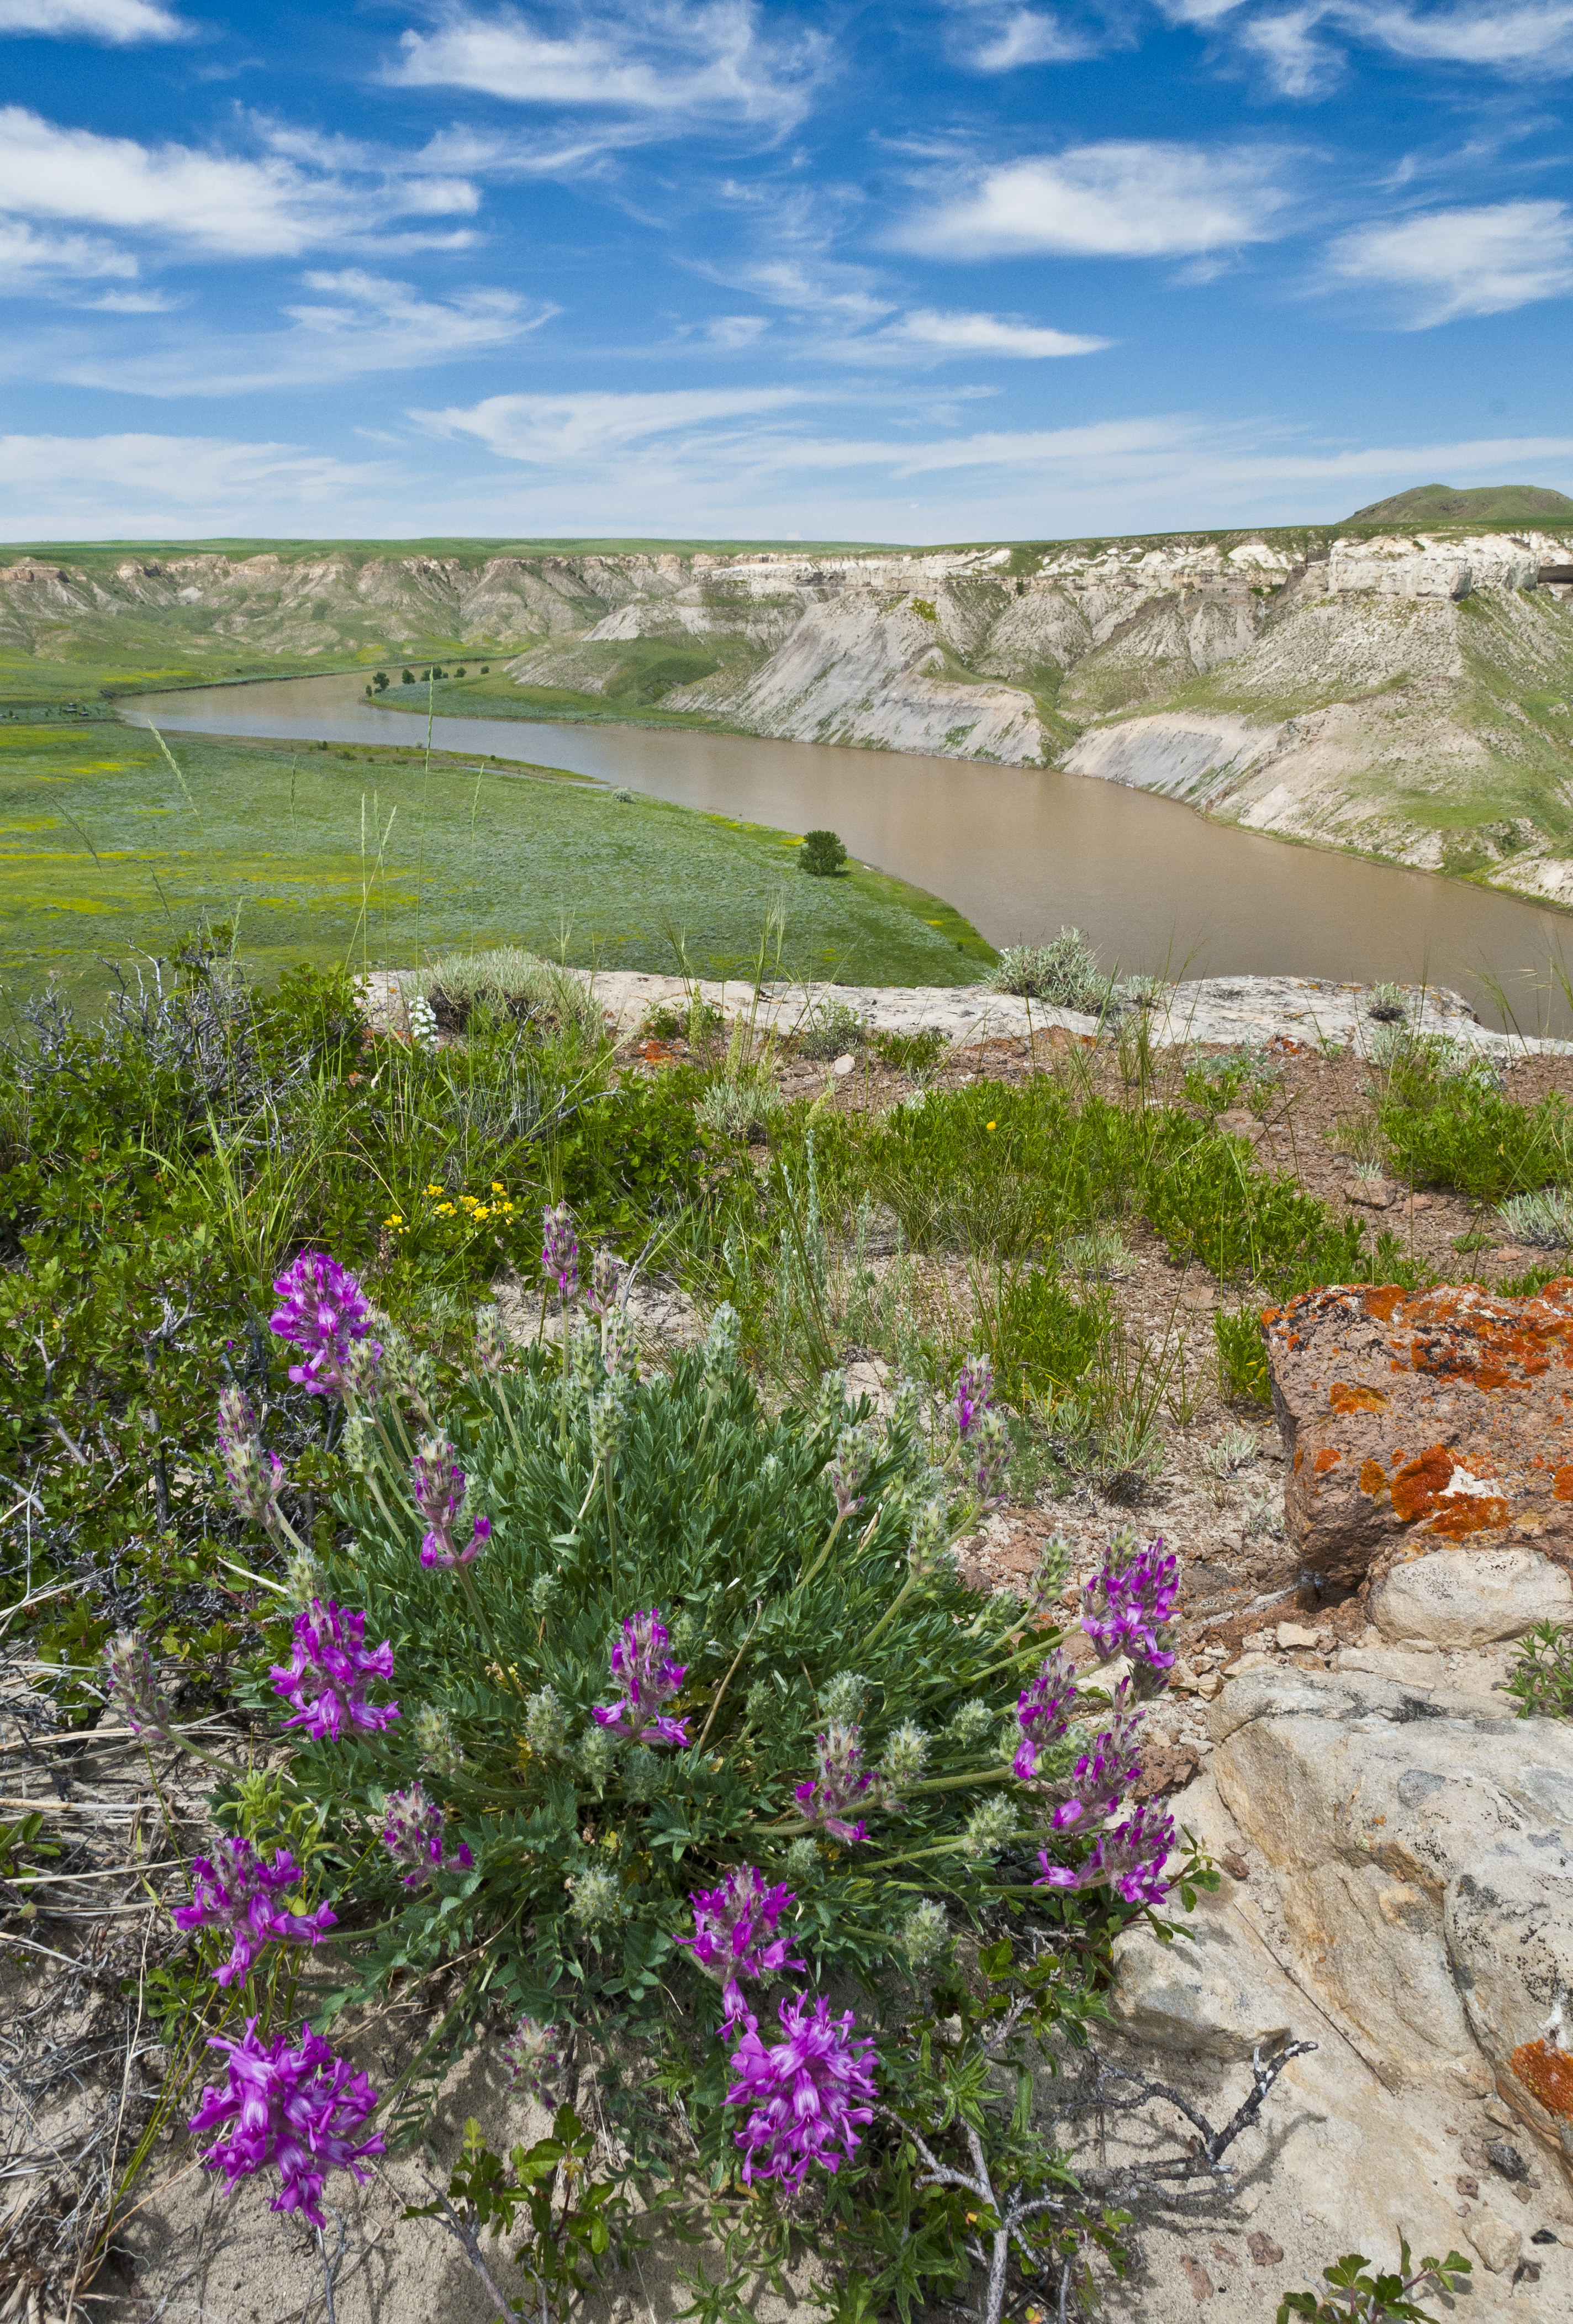 A tranquil waterway cuts through flat hills of the Upper Missouri River Breaks